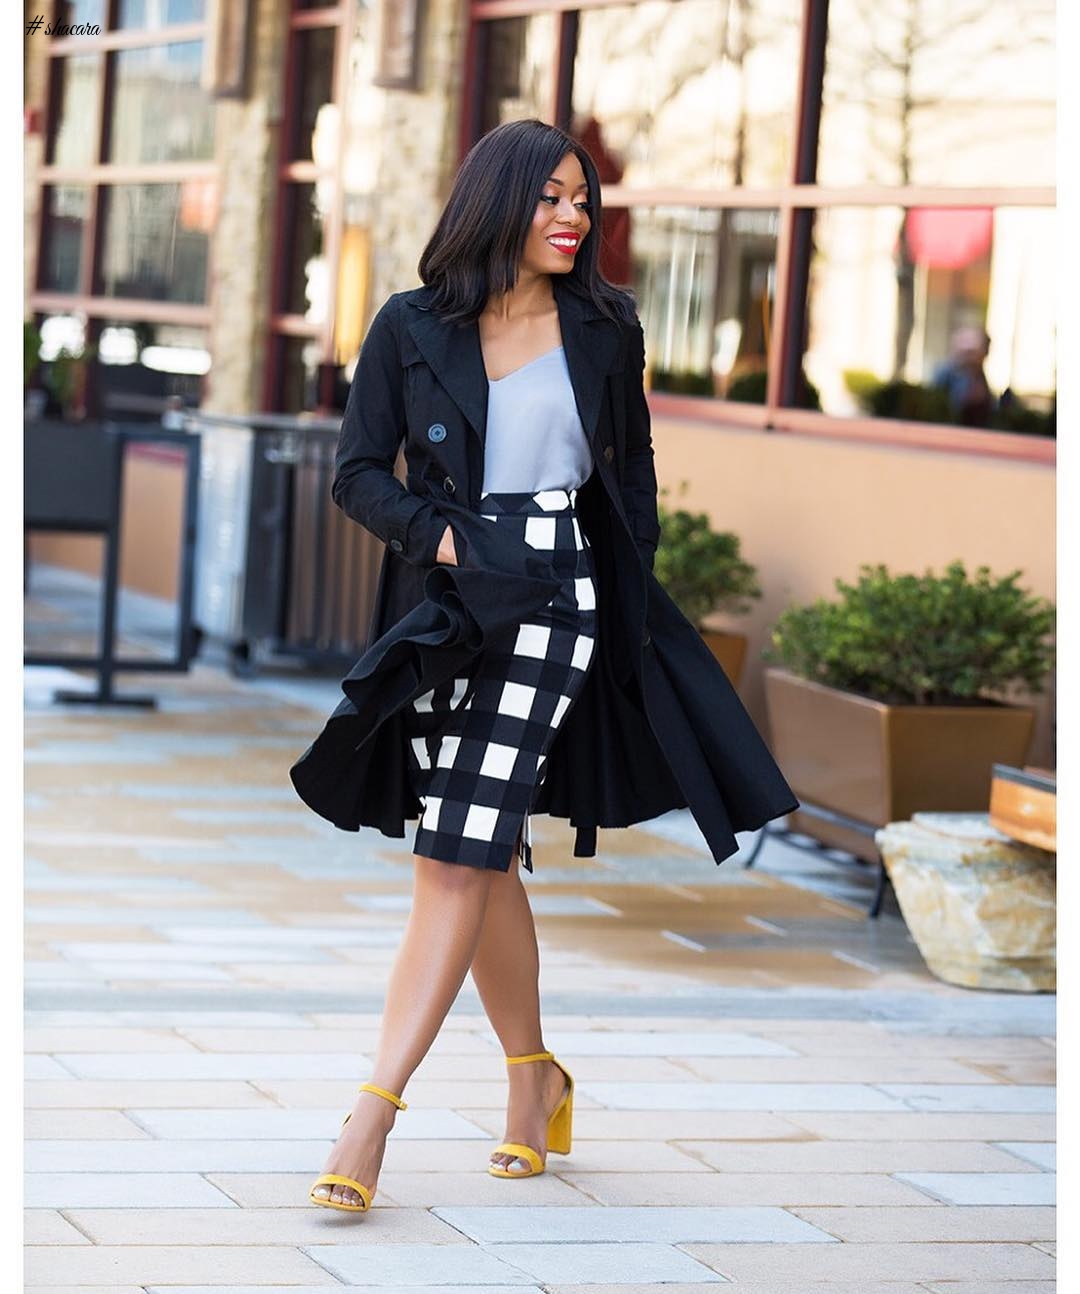 6 STYLE MOVES THAT WORK FOR OFFICE